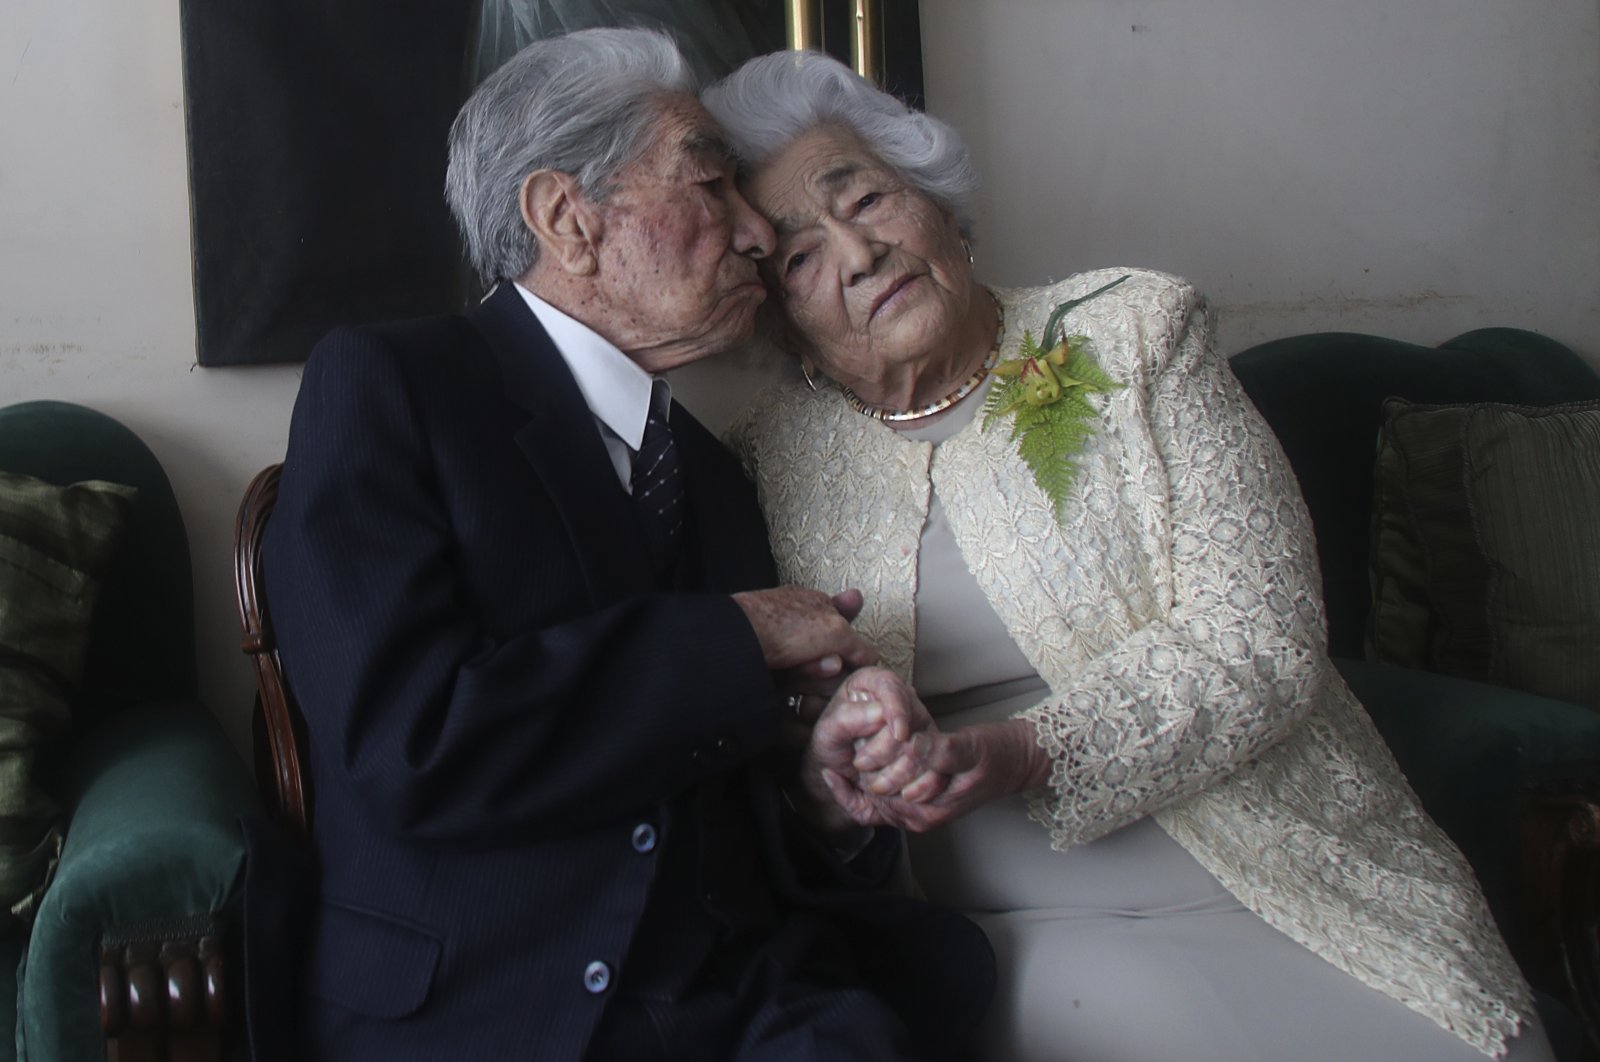 Married couple Julio Mora Tapia, 110, and Waldramina Quinteros, 104, both retired teachers, pose for a photo at their home in Quito, Ecuador, Aug. 28, 2020. (AP Photo)